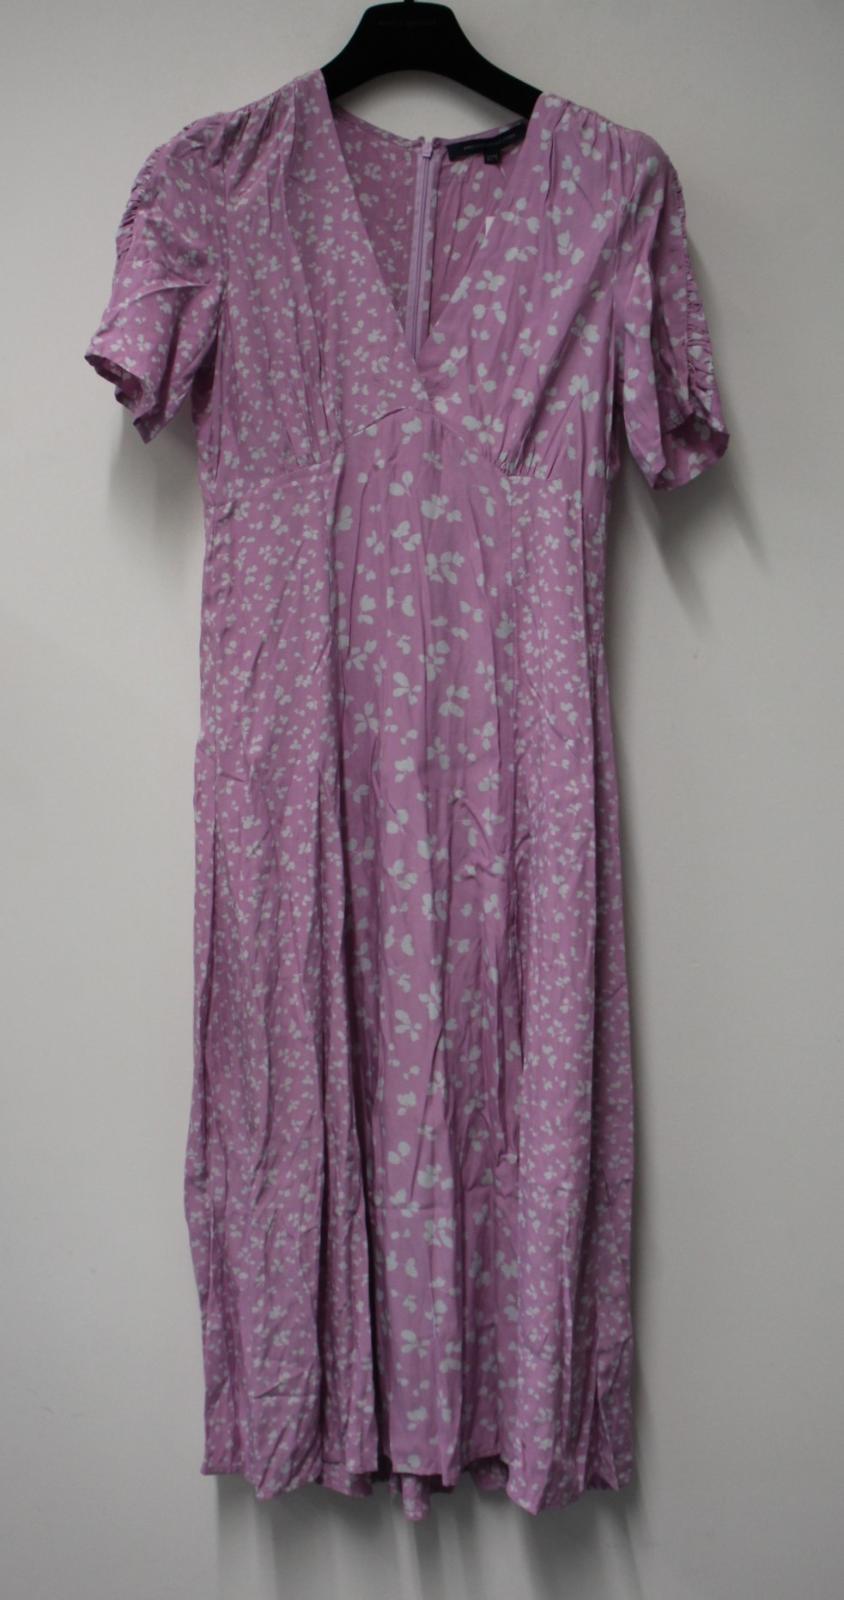 FRENCH CONNECTION Ladies Lavender Pink Floral Print Midi Dress Size UK14 NEW